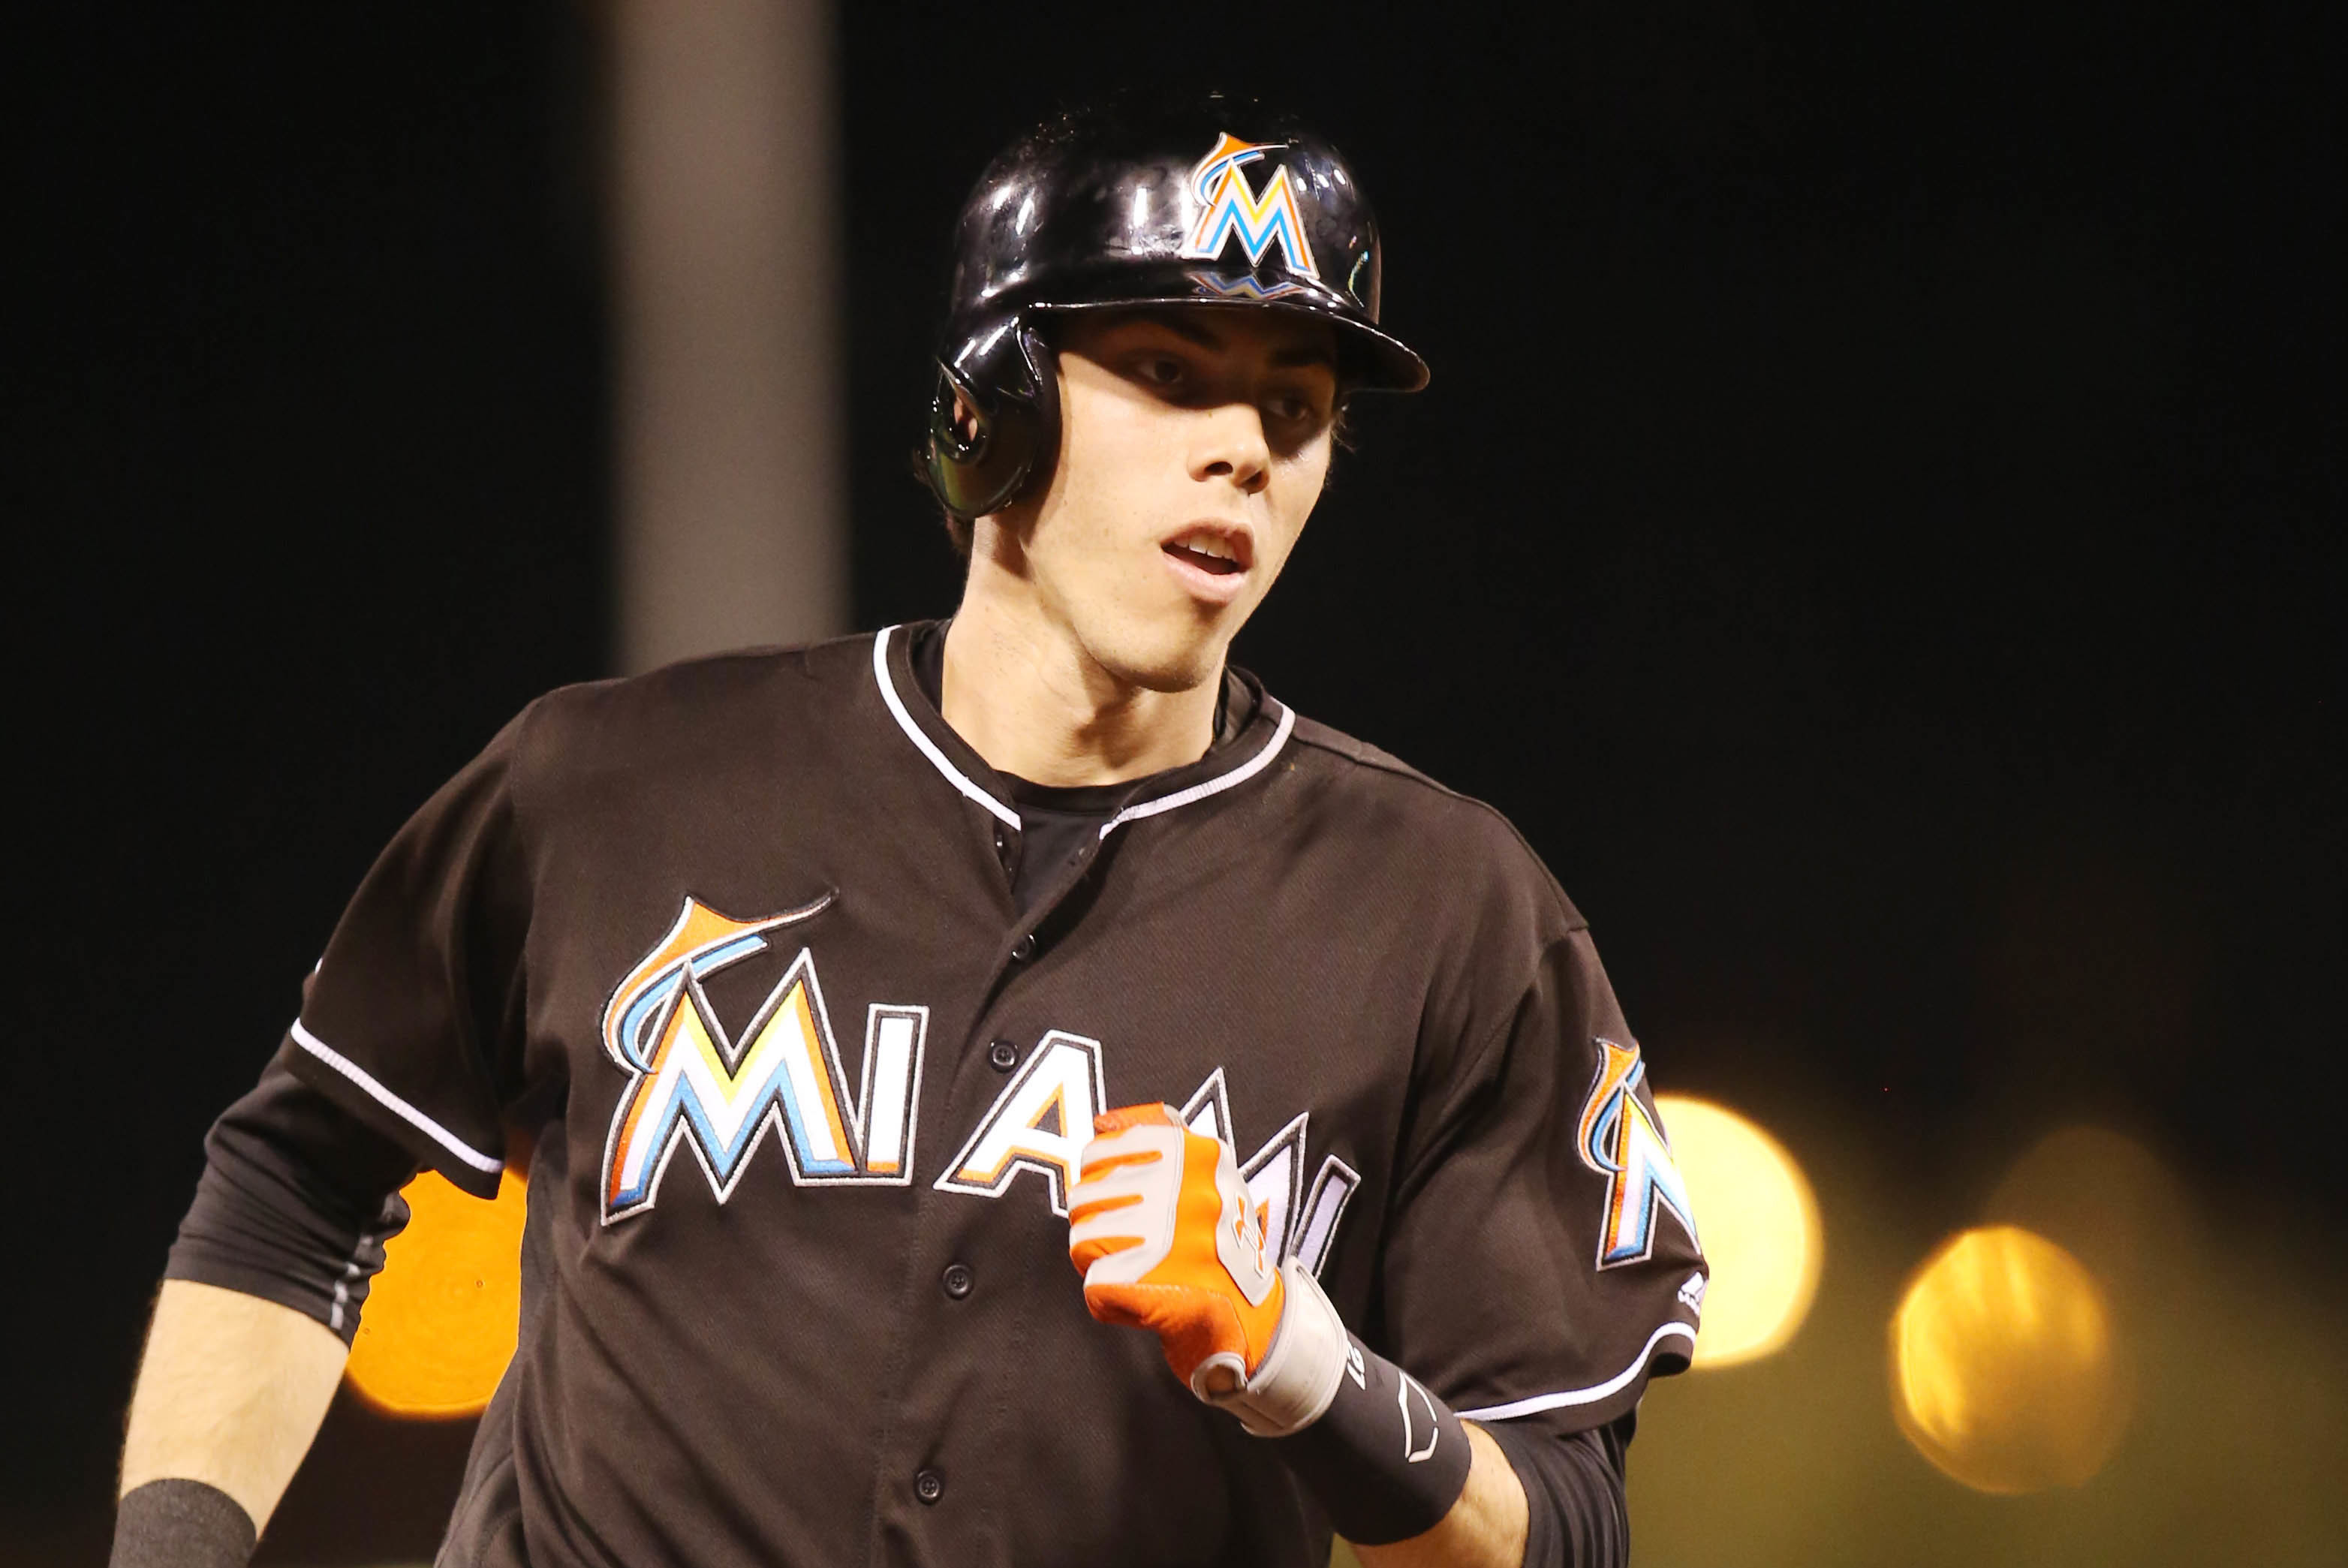 Getting Yelich back on track is major priority for Brewers